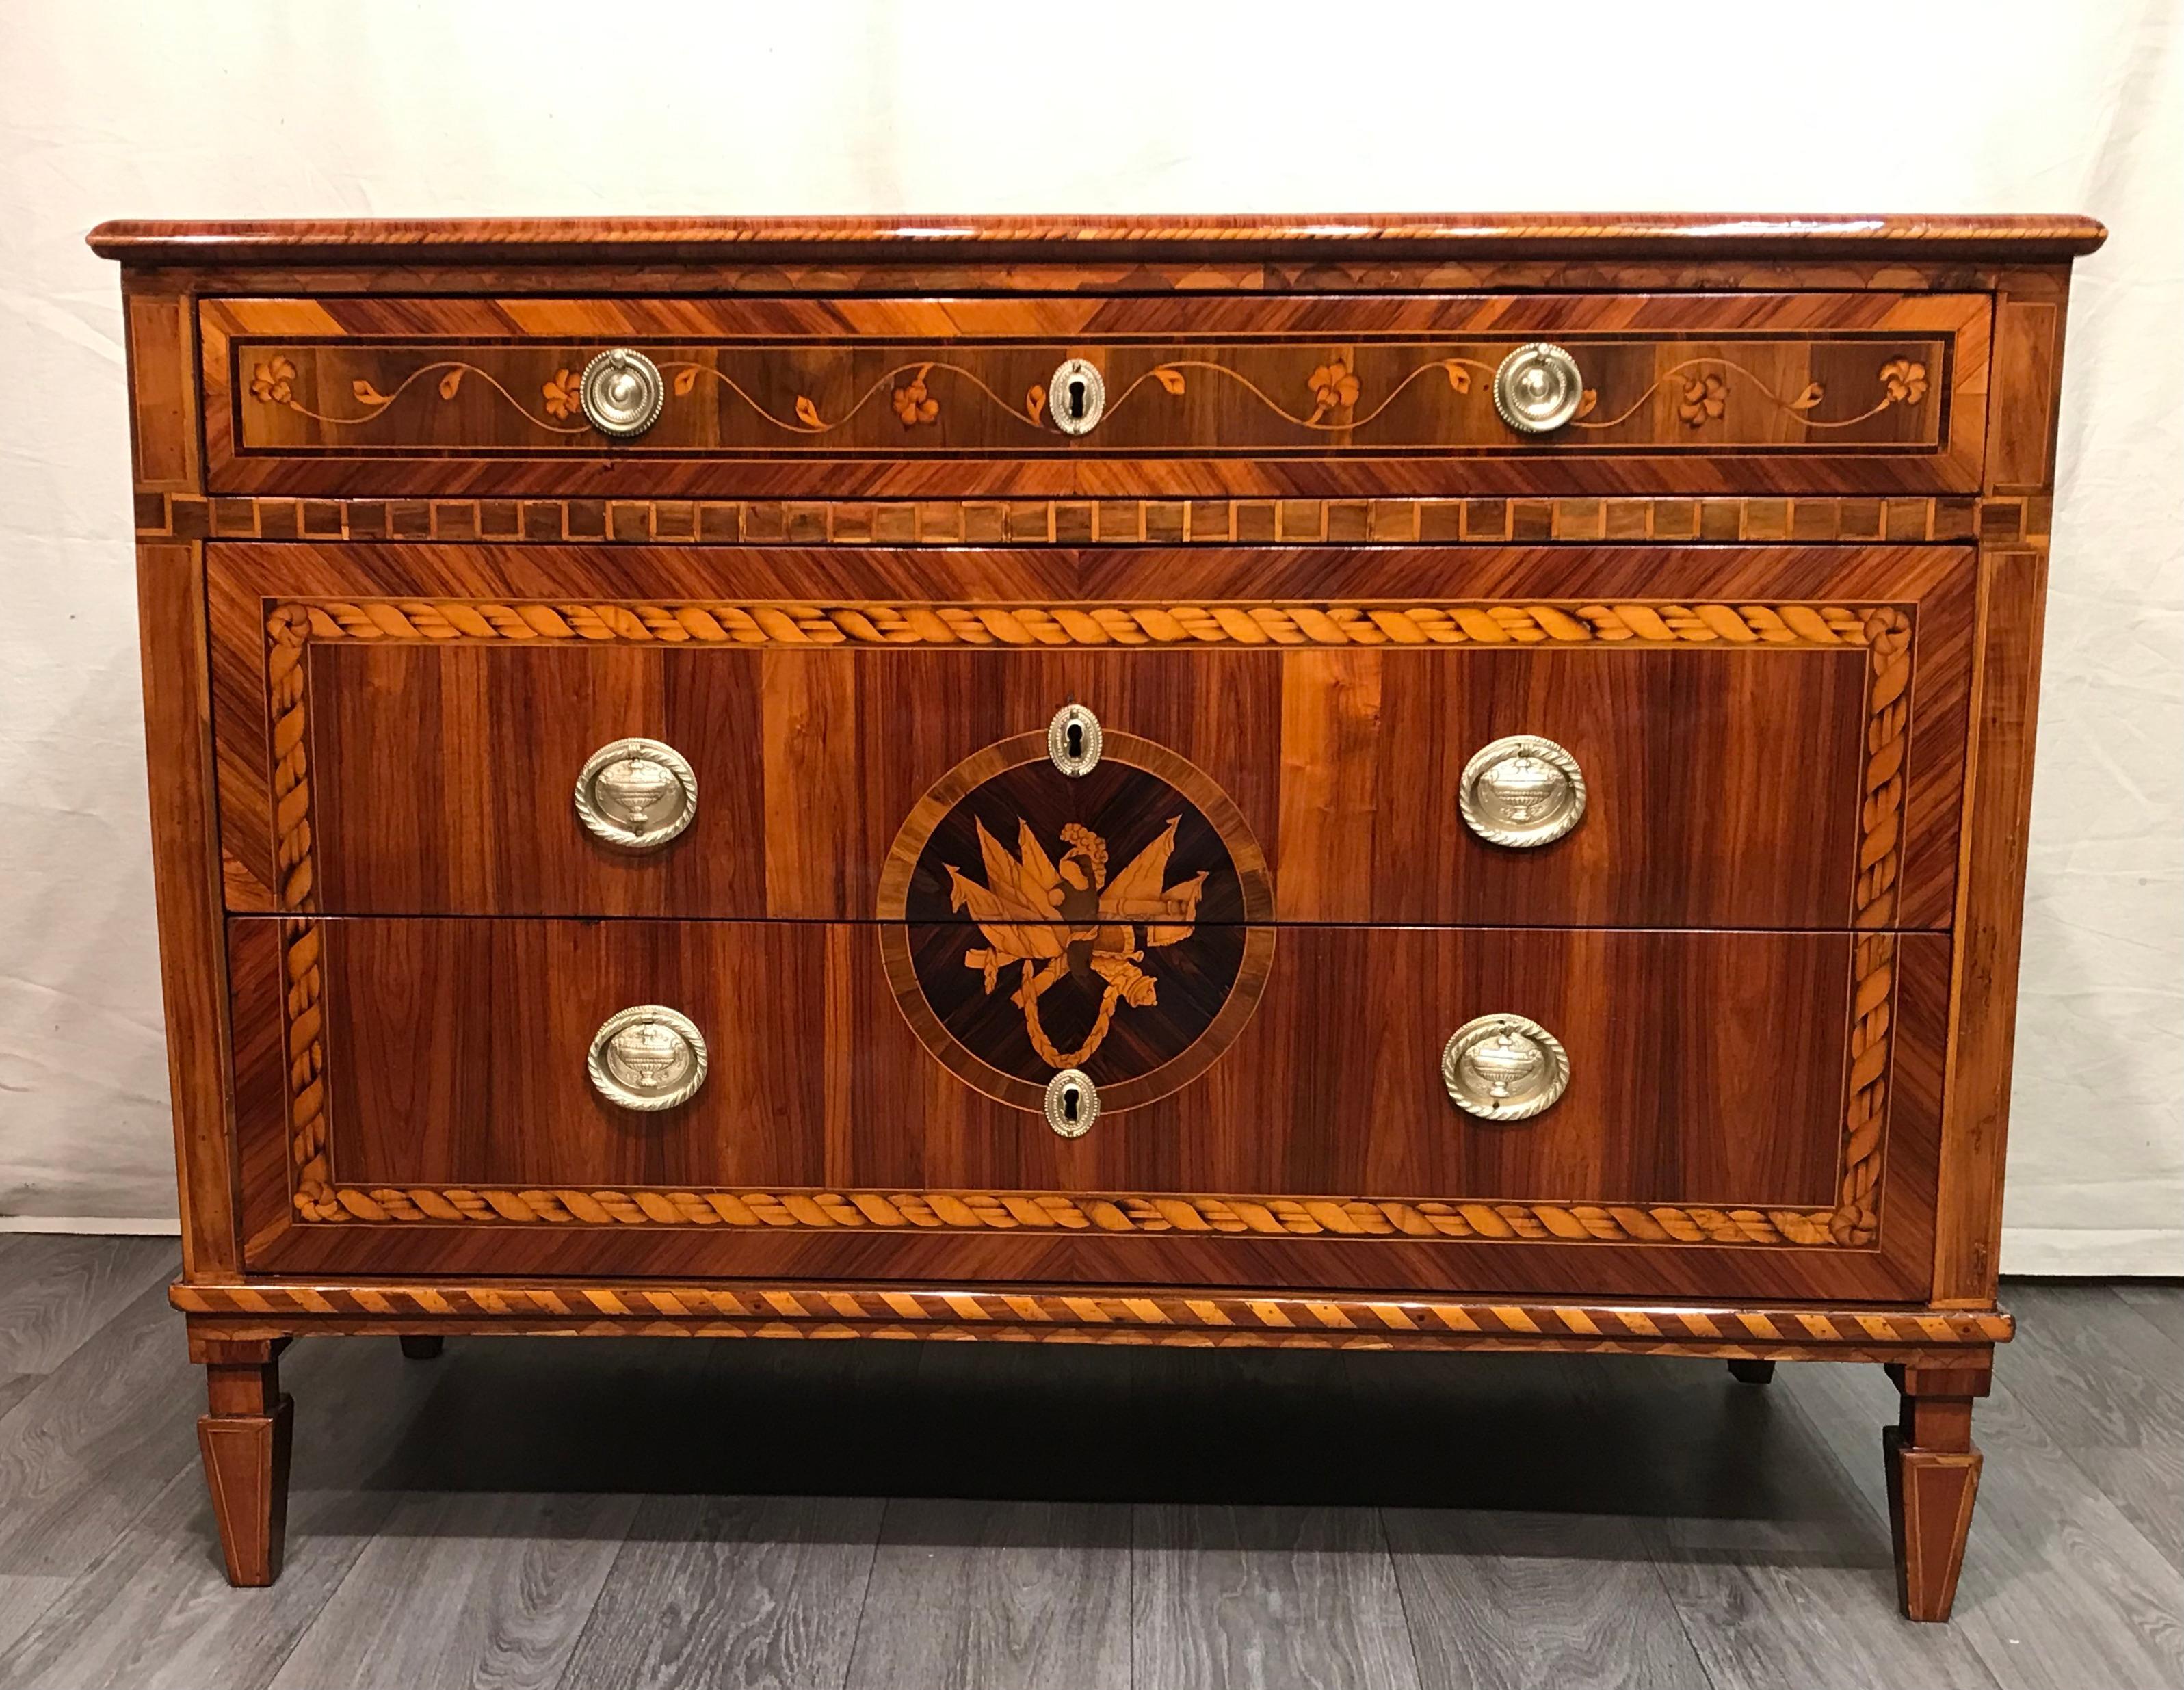 Neoclassical chest of drawers, Italy 1780.
This exquisite chest of drawers has a pretty kingwood veneer and and exquisite marquetry in satin wood and other prestigious woods. The three drawers have a connected marquetry design. The top drawer is